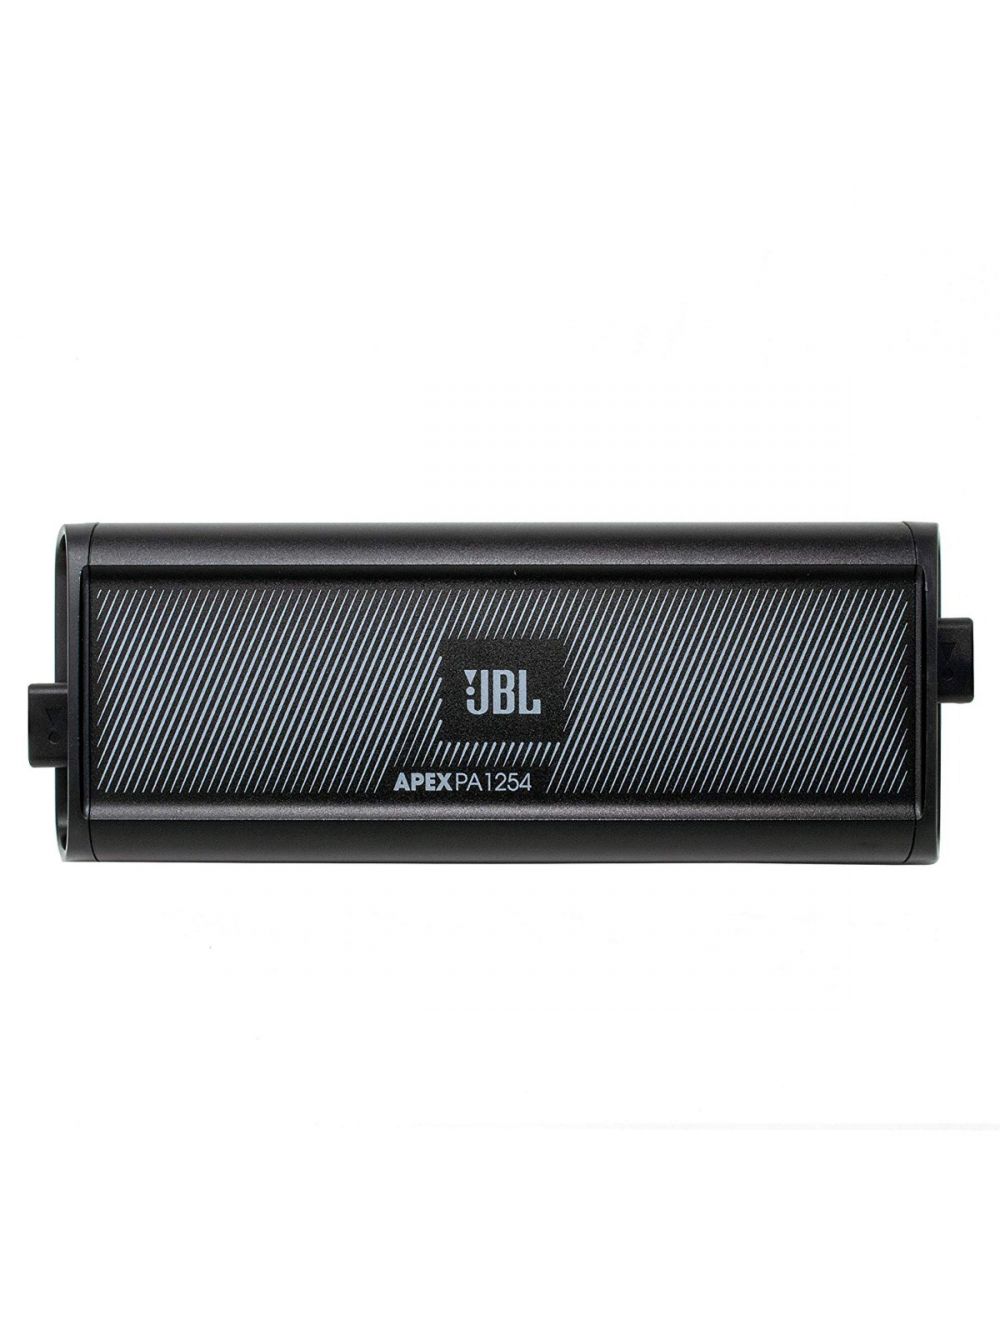 JBL Apex PA454 Compact 4-channel Powersports Amplifier  45 watts RMS x 4